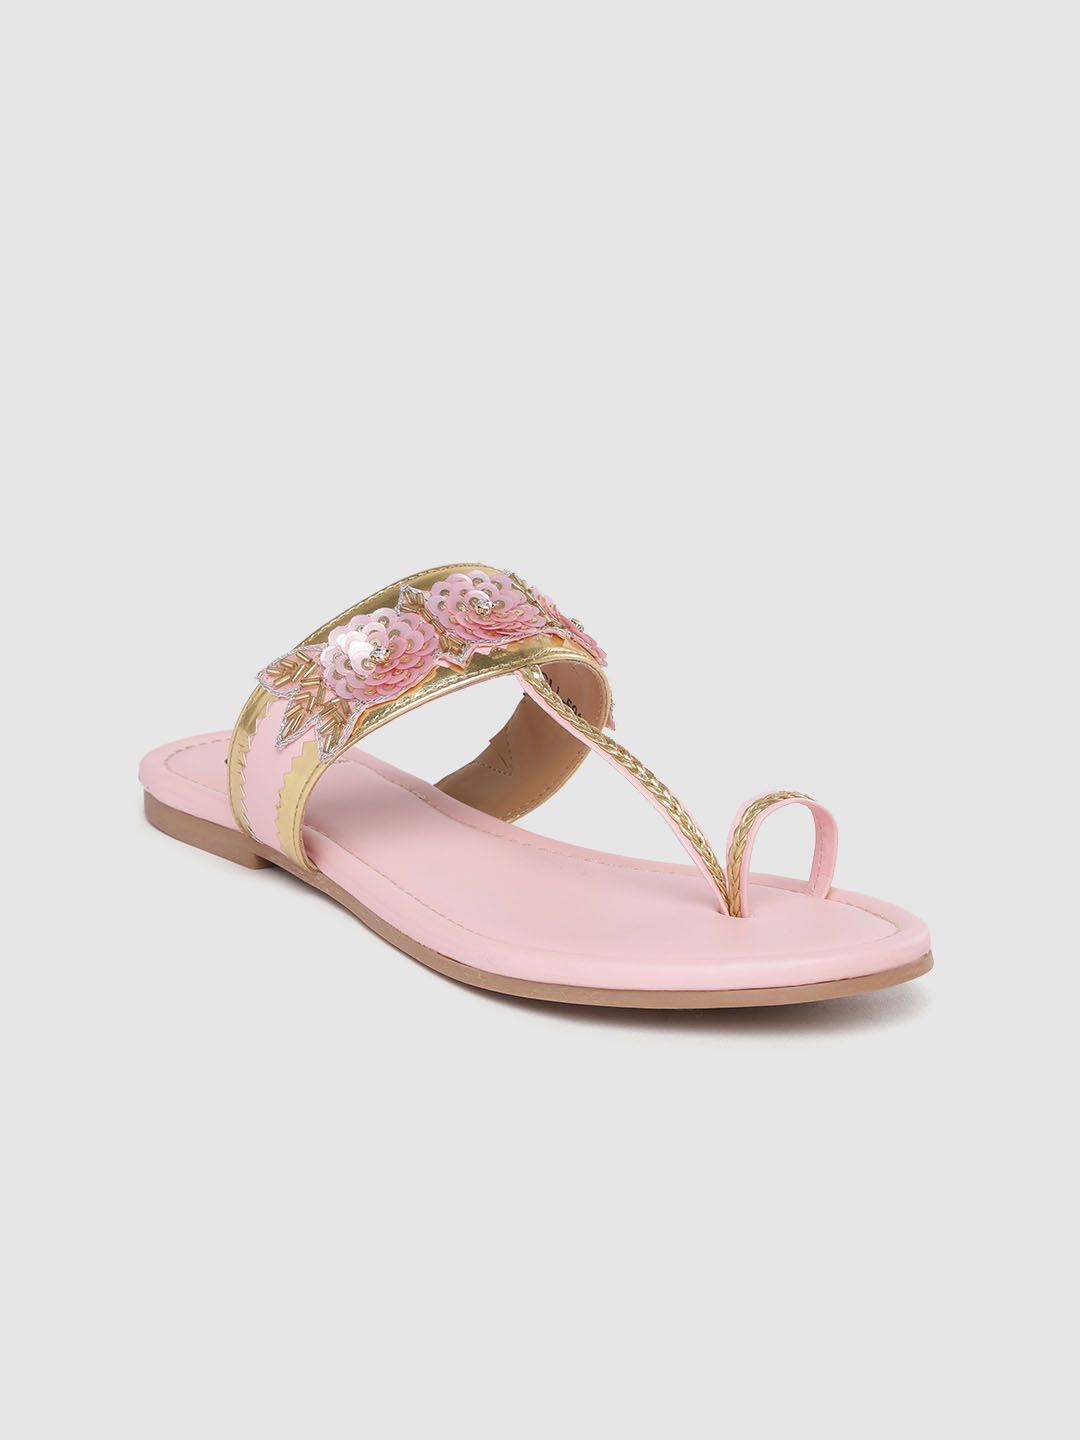 Carlton London Women Pink & Gold-Toned Embellished Braided One Toe Flats Price in India